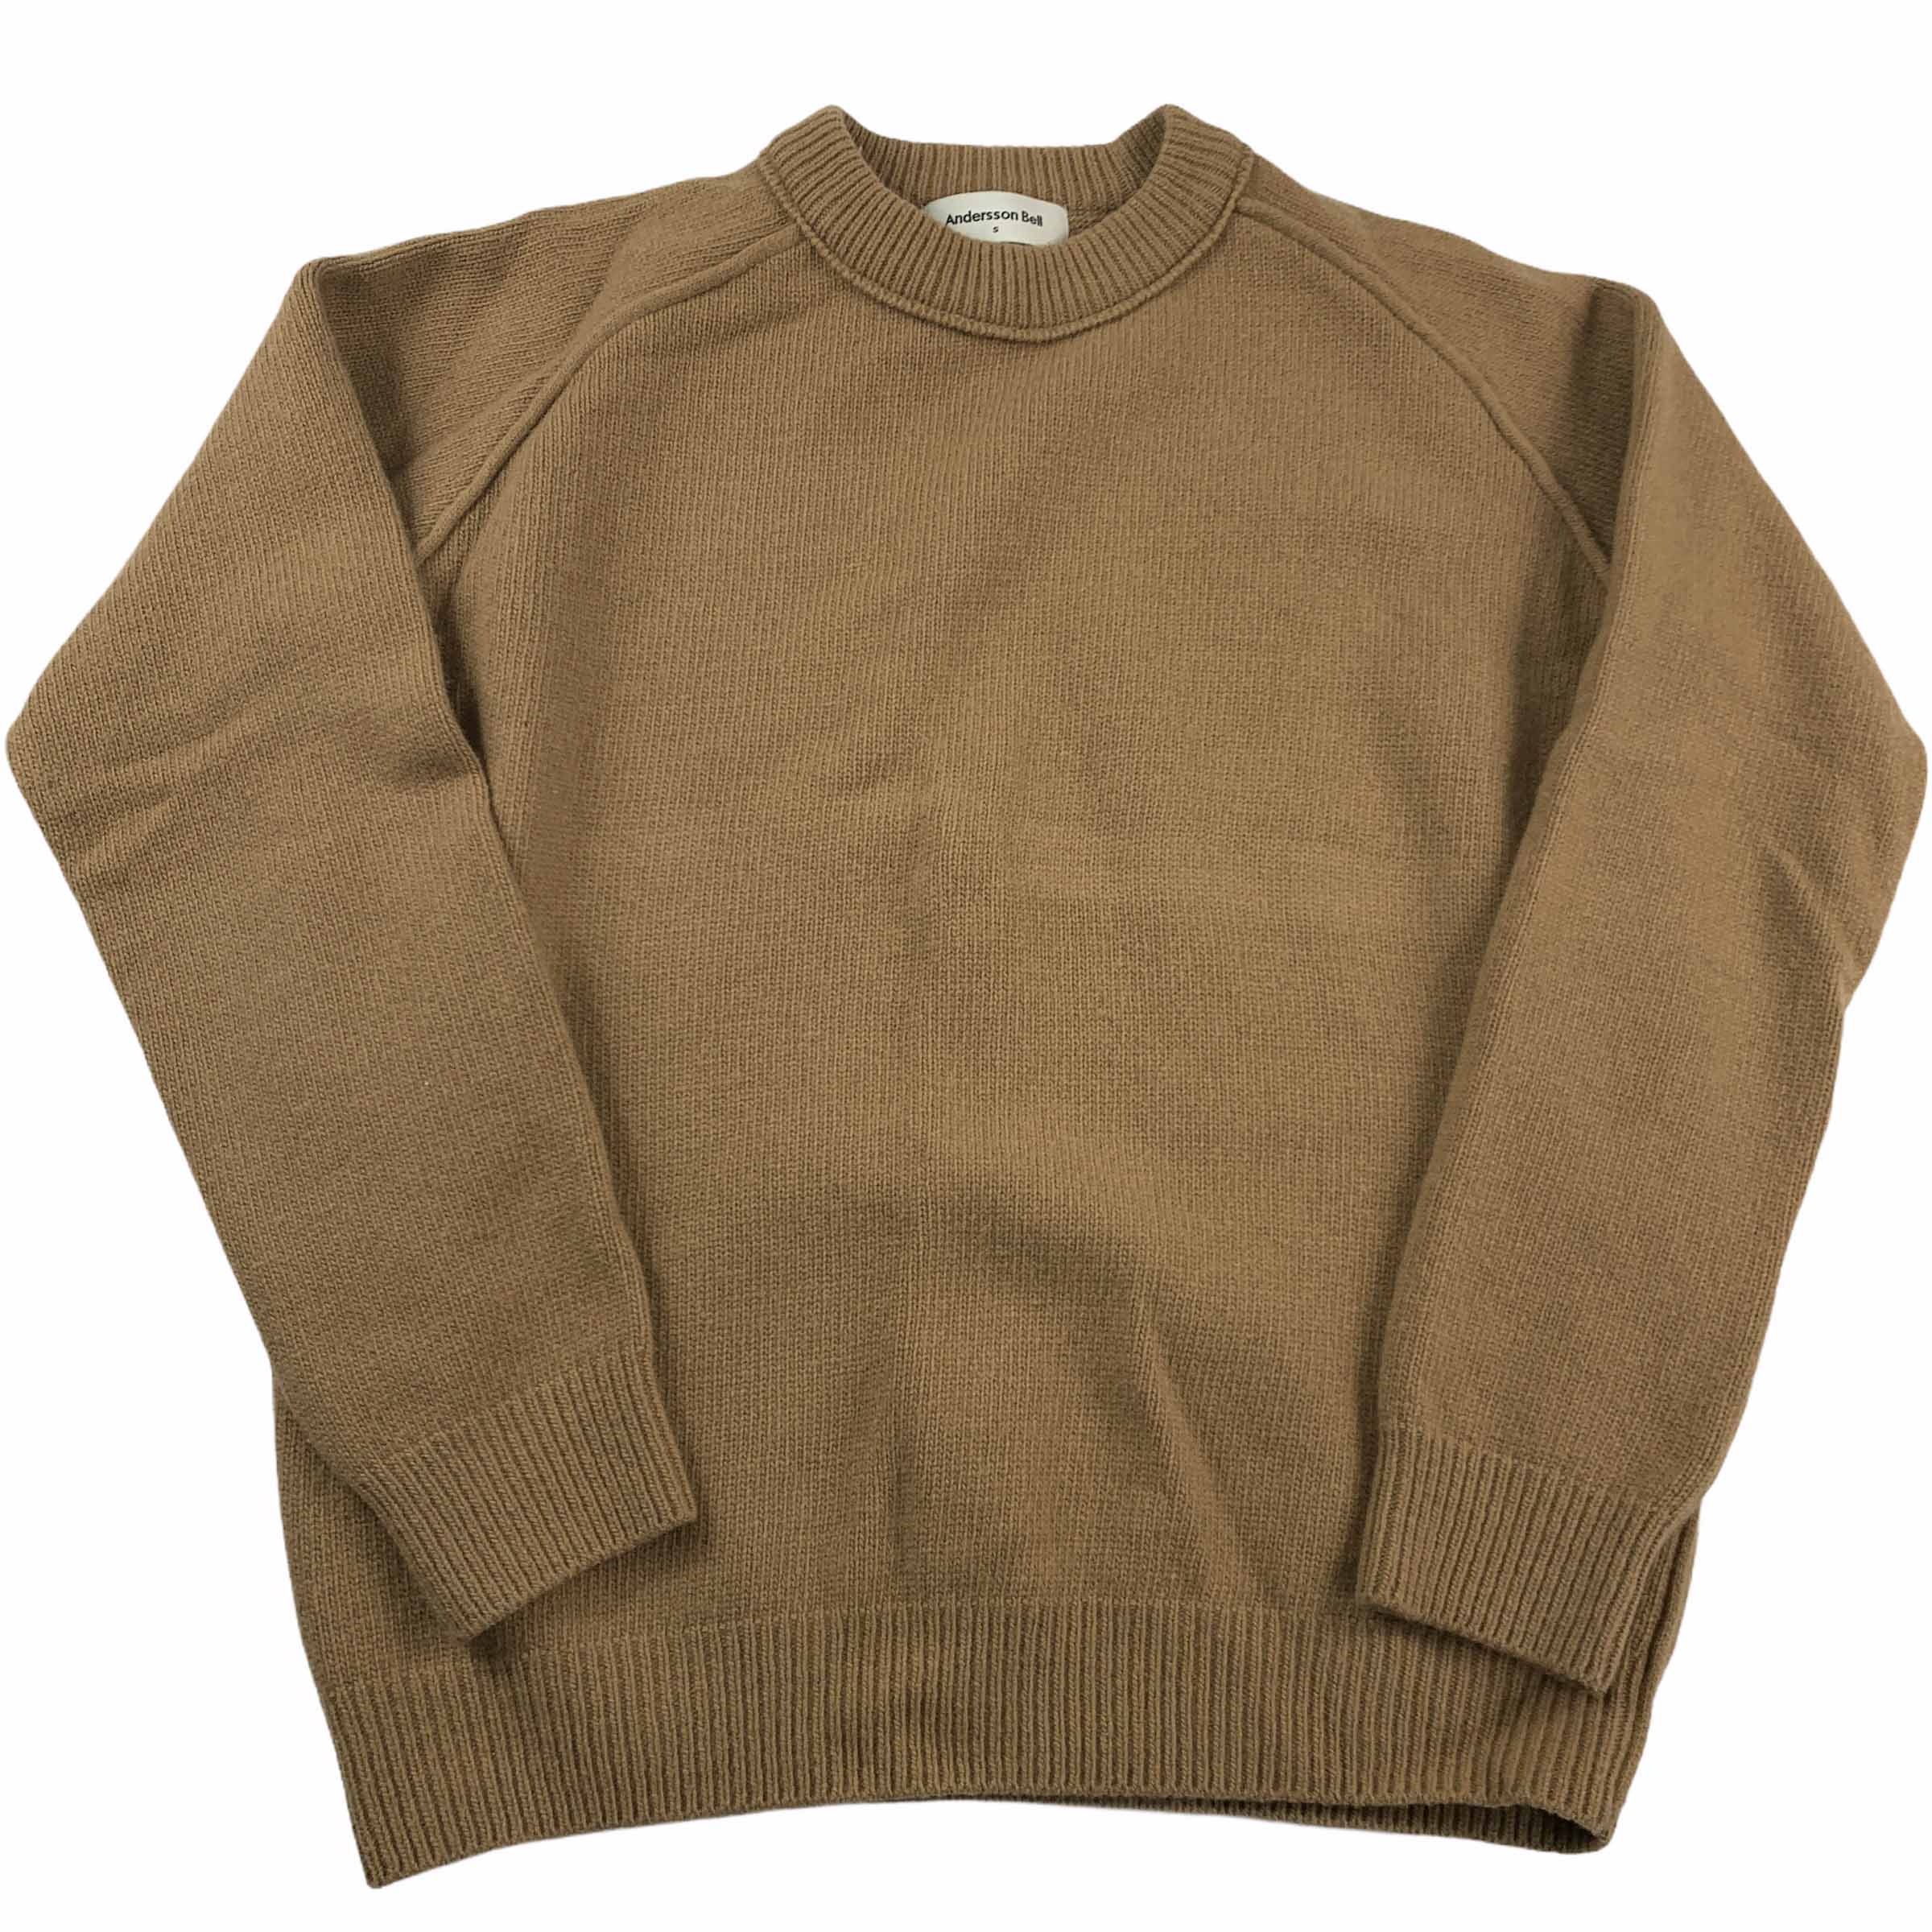 [Anderson Bell] Camel Crewneck Sweater - Size S